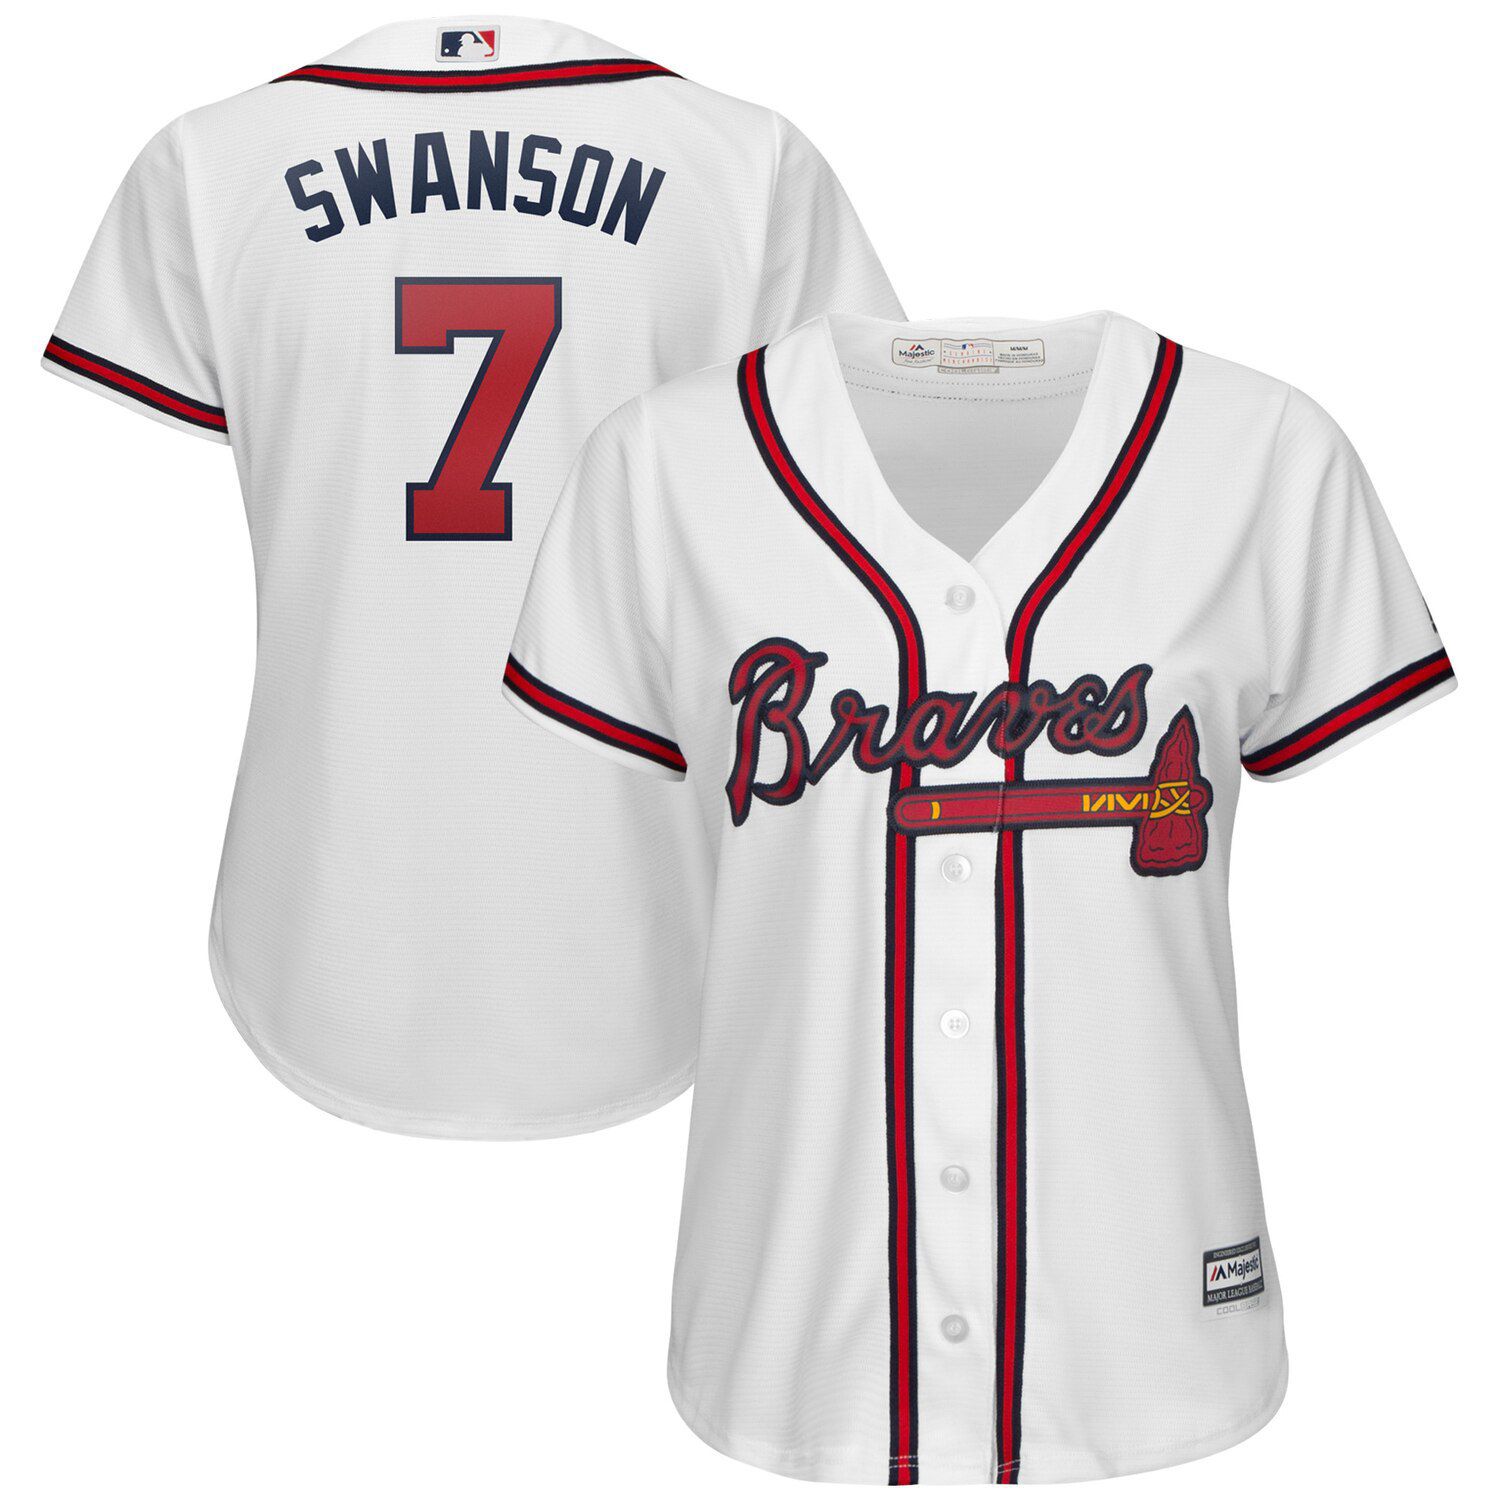 dansby jersey